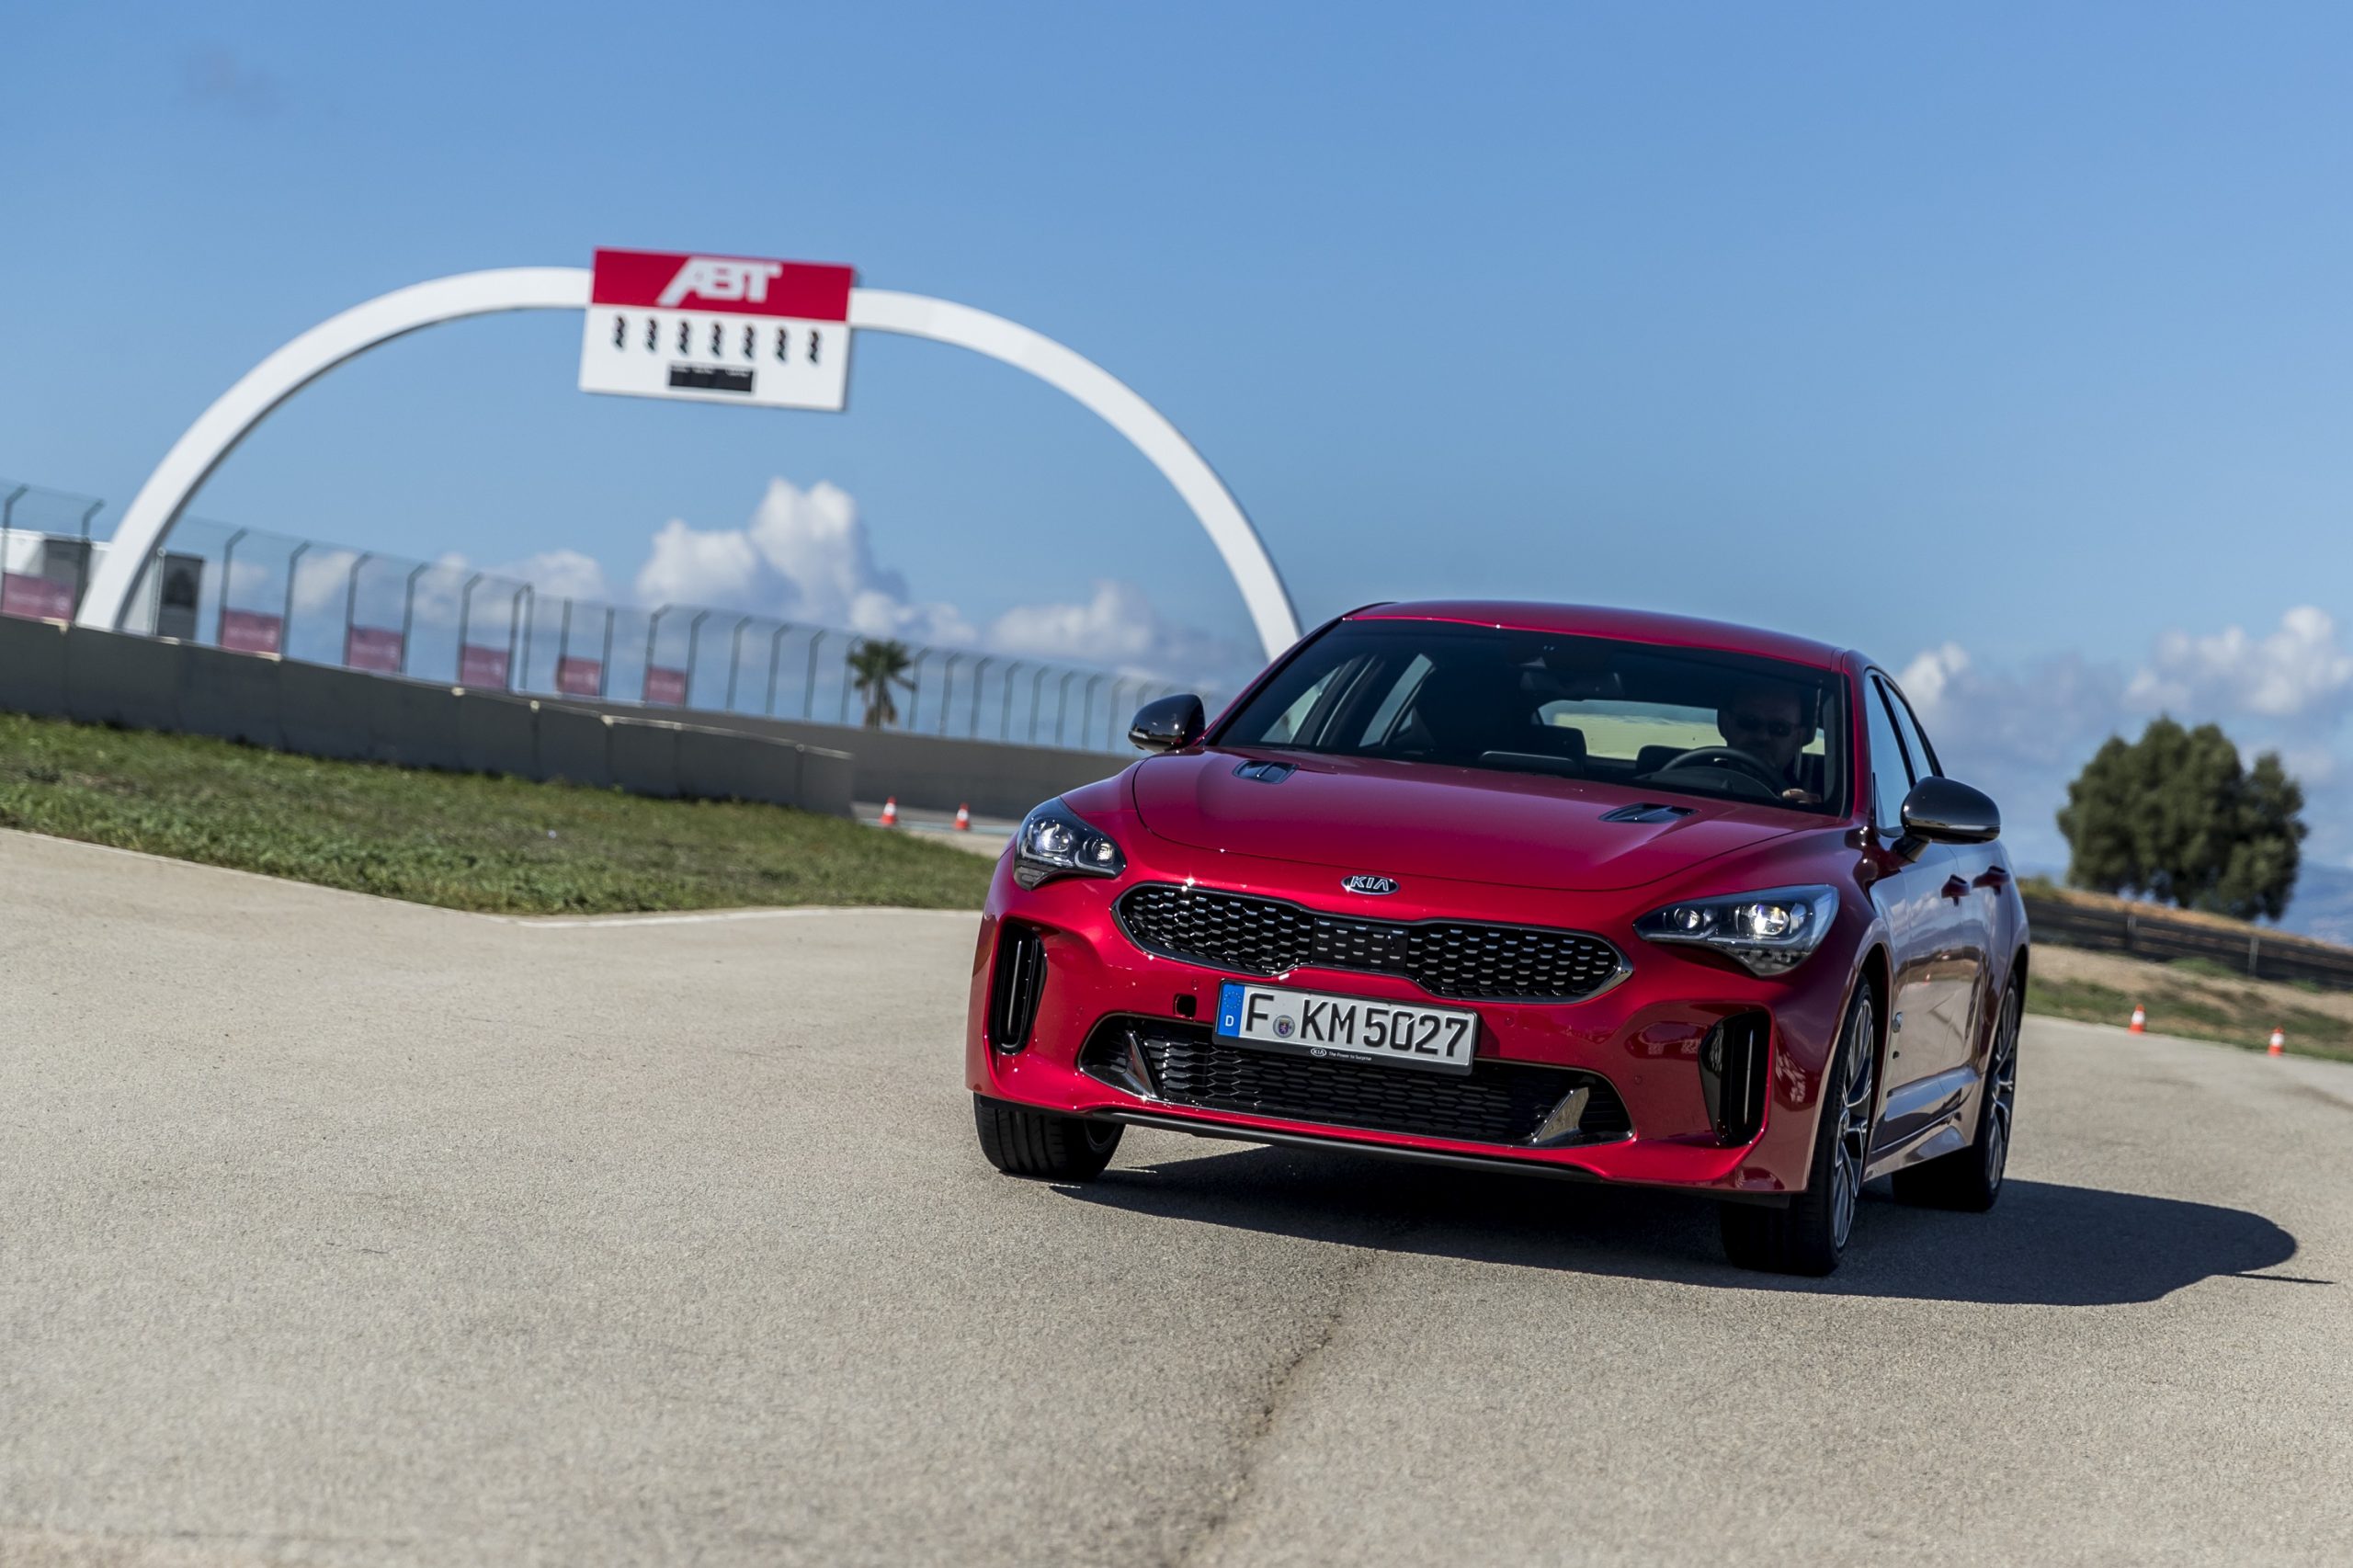 A red Kia Stinger GT on a race track shot from the front 3/4 angle